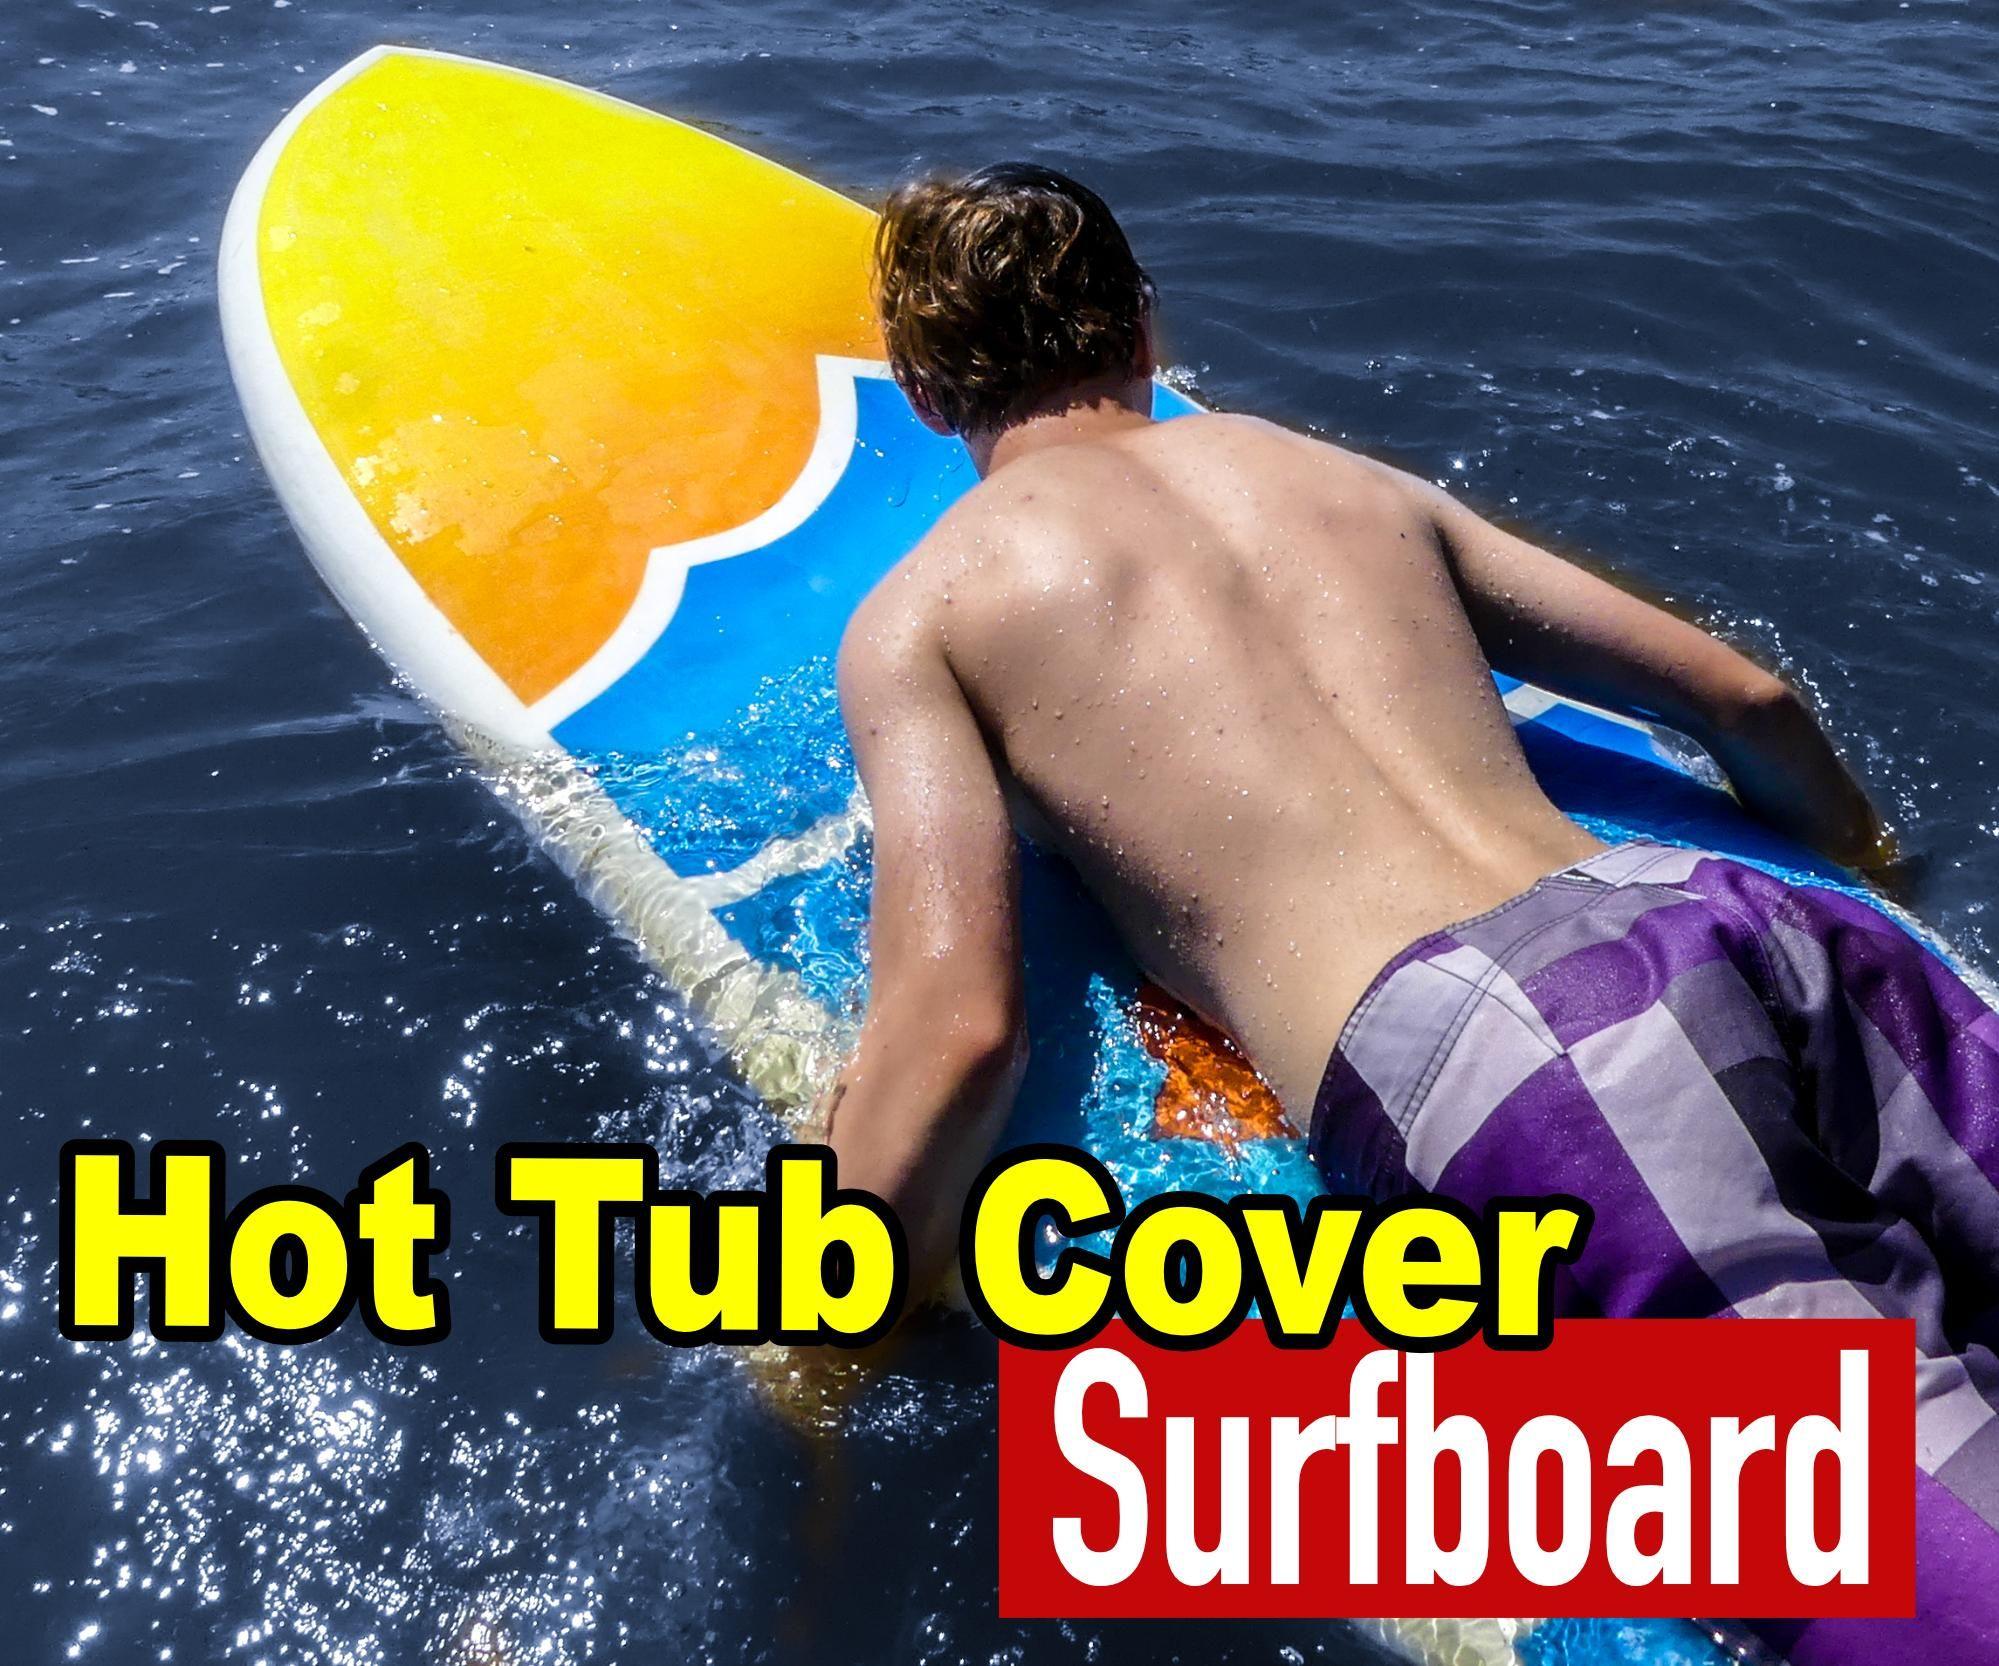 DIY Surfboard From a Hot Tub Cover and Curtains 